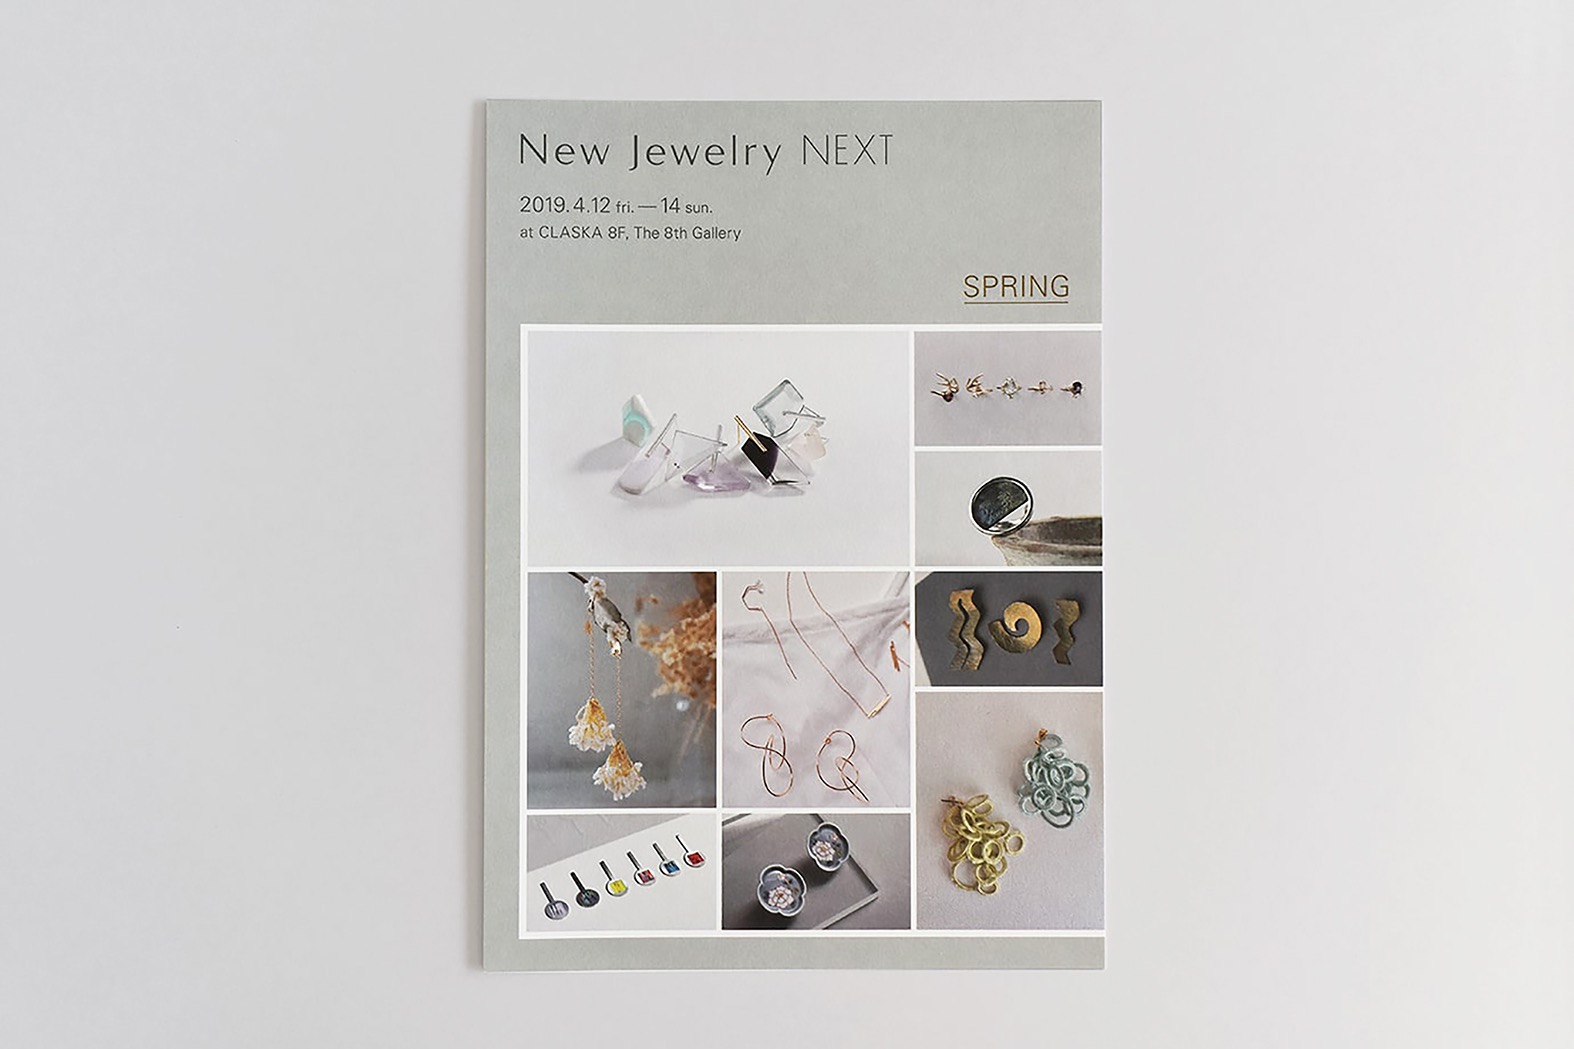 works_new-jewelry-next-2019_cover